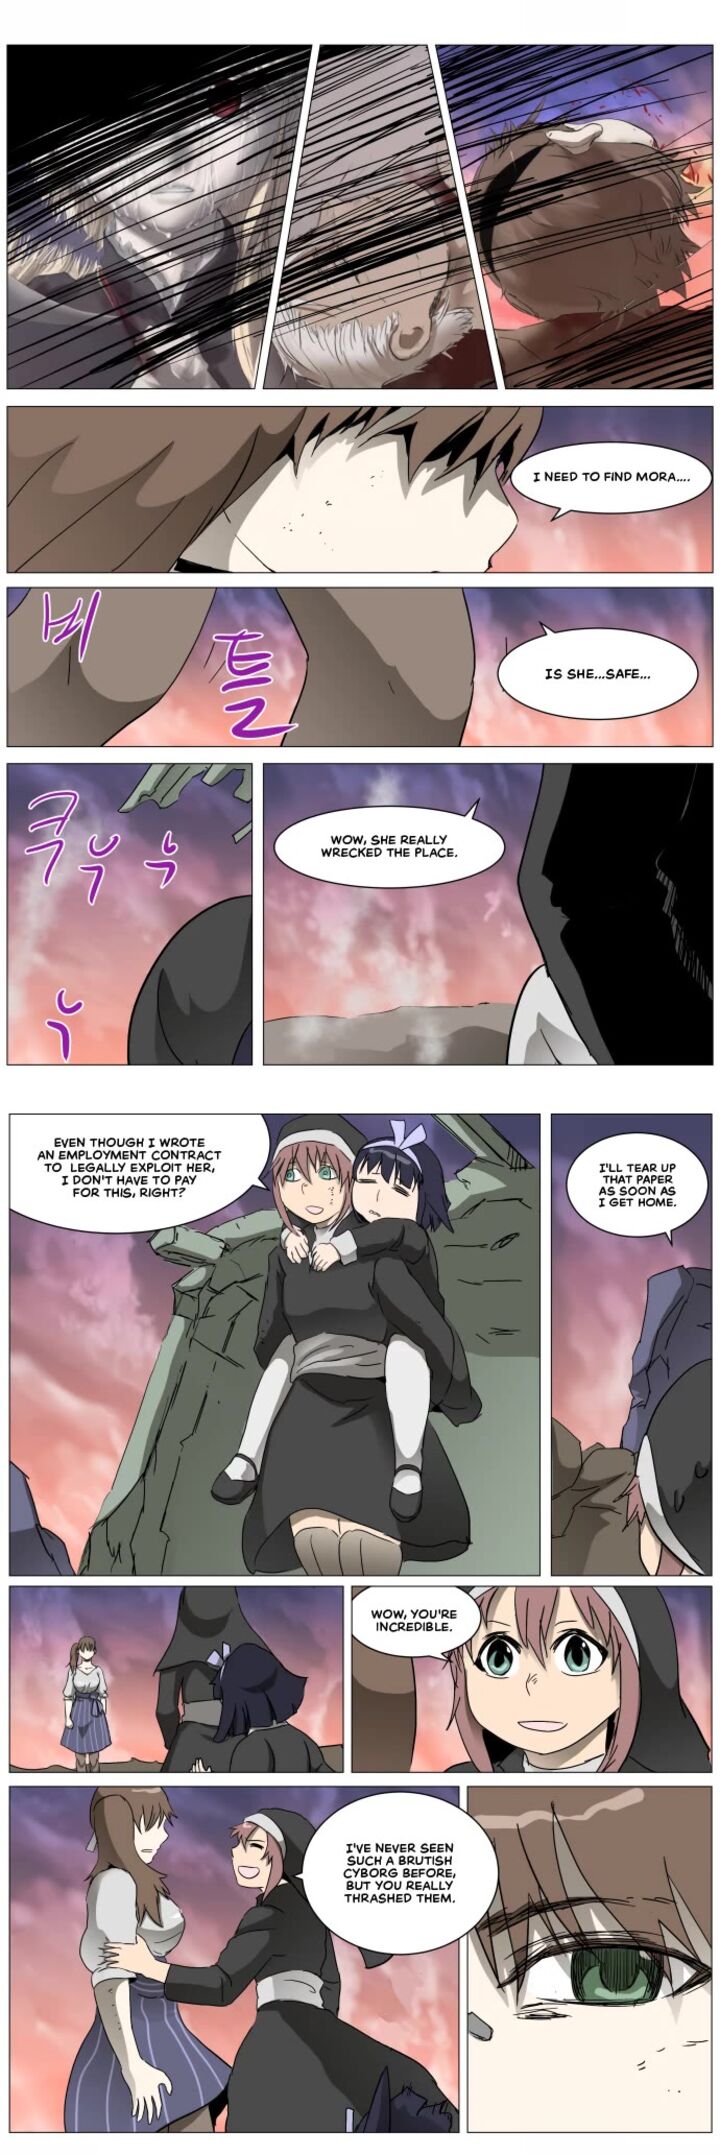 Knight Run Chapter 285 Page 17